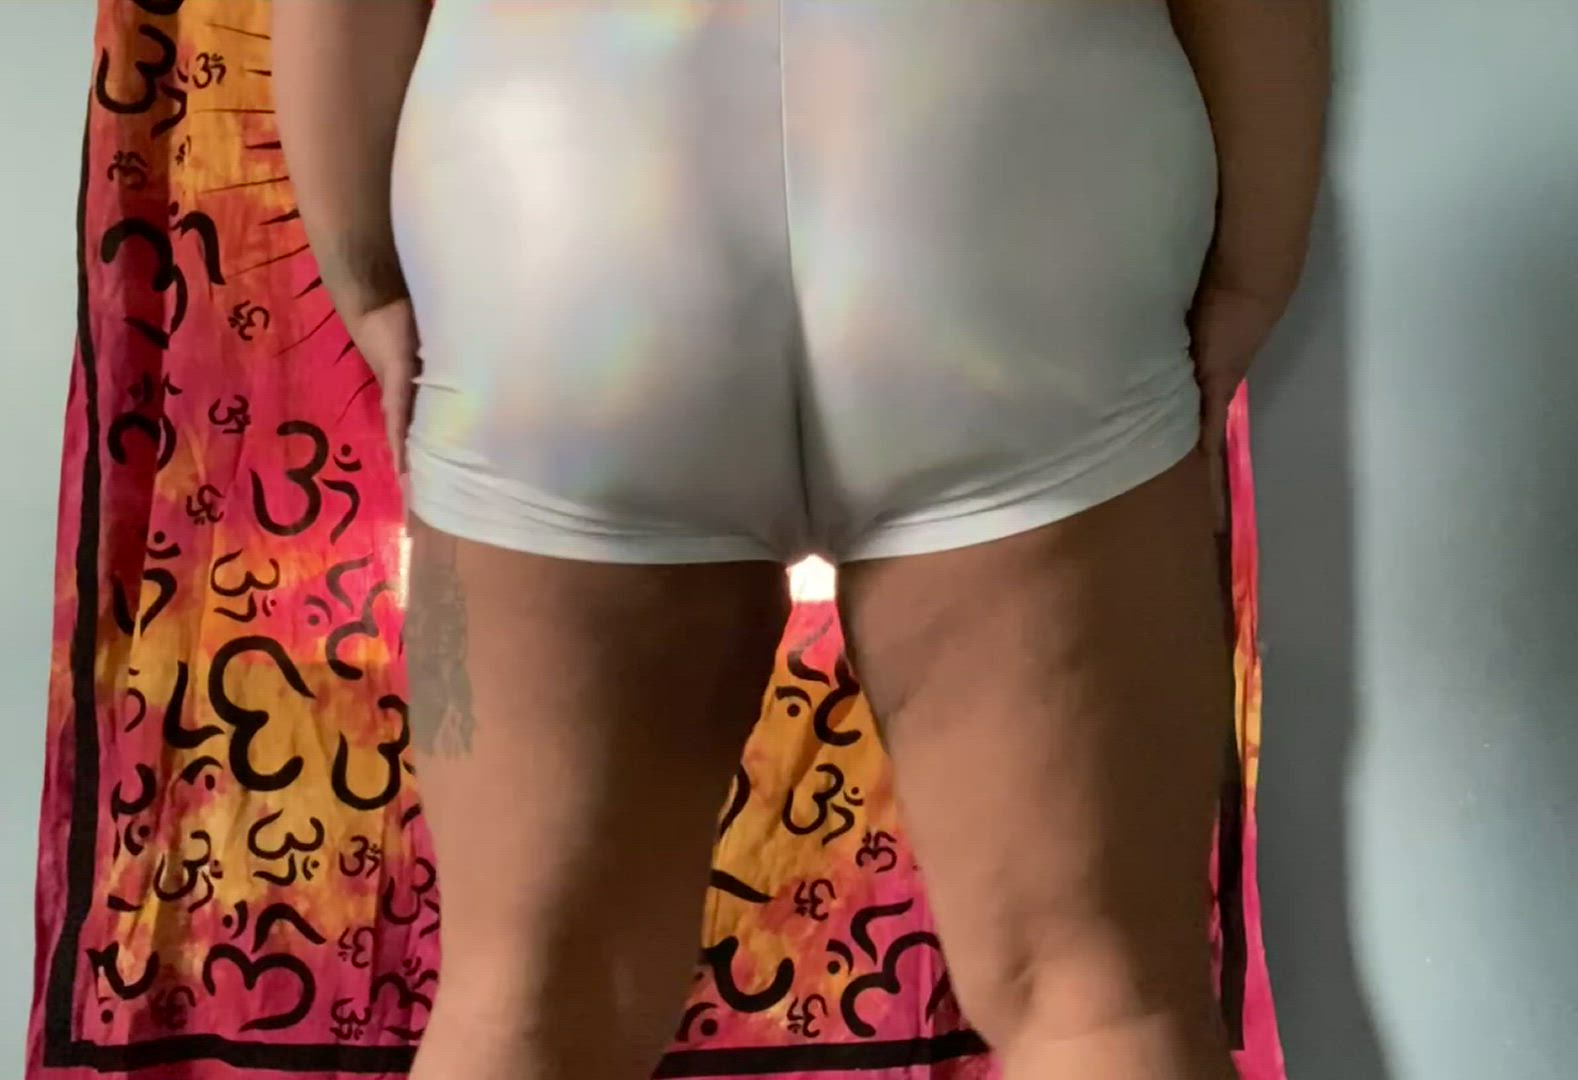 Ass porn video with onlyfans model strawberricake <strong>@strawberricake</strong>